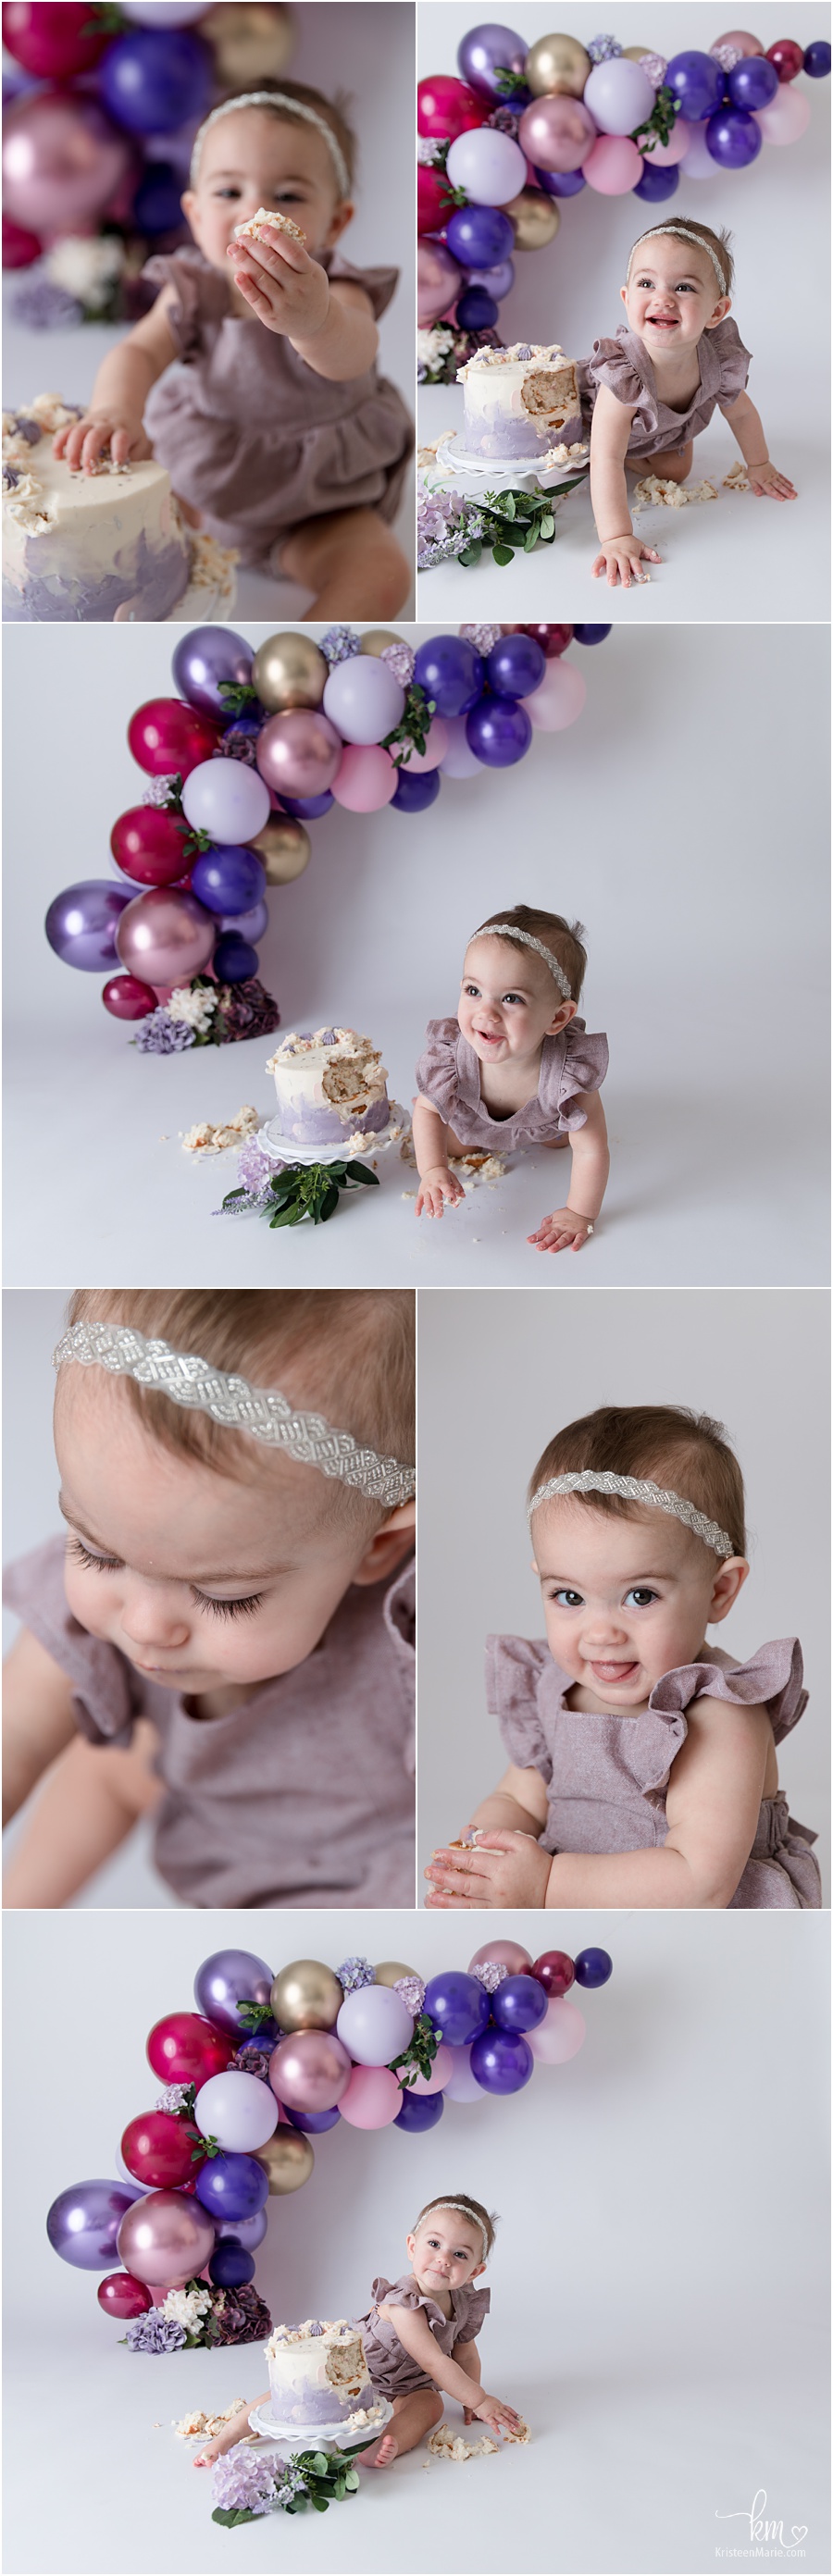 adorable 1st birthday cake smash session - soft purple baloon arch with pink and maroon